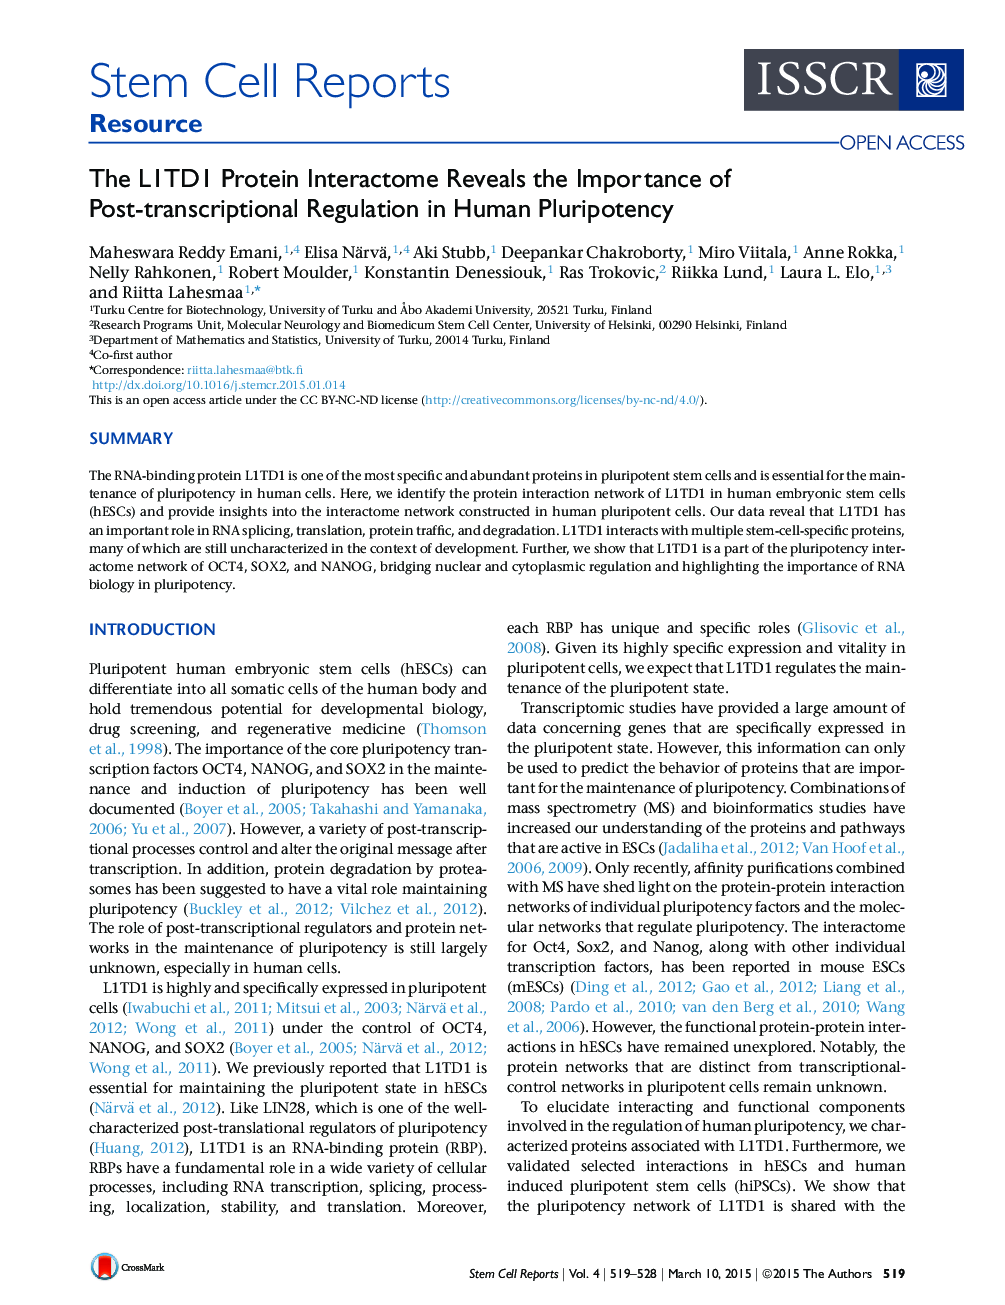 The L1TD1 Protein Interactome Reveals the Importance of Post-transcriptional Regulation in Human Pluripotency 